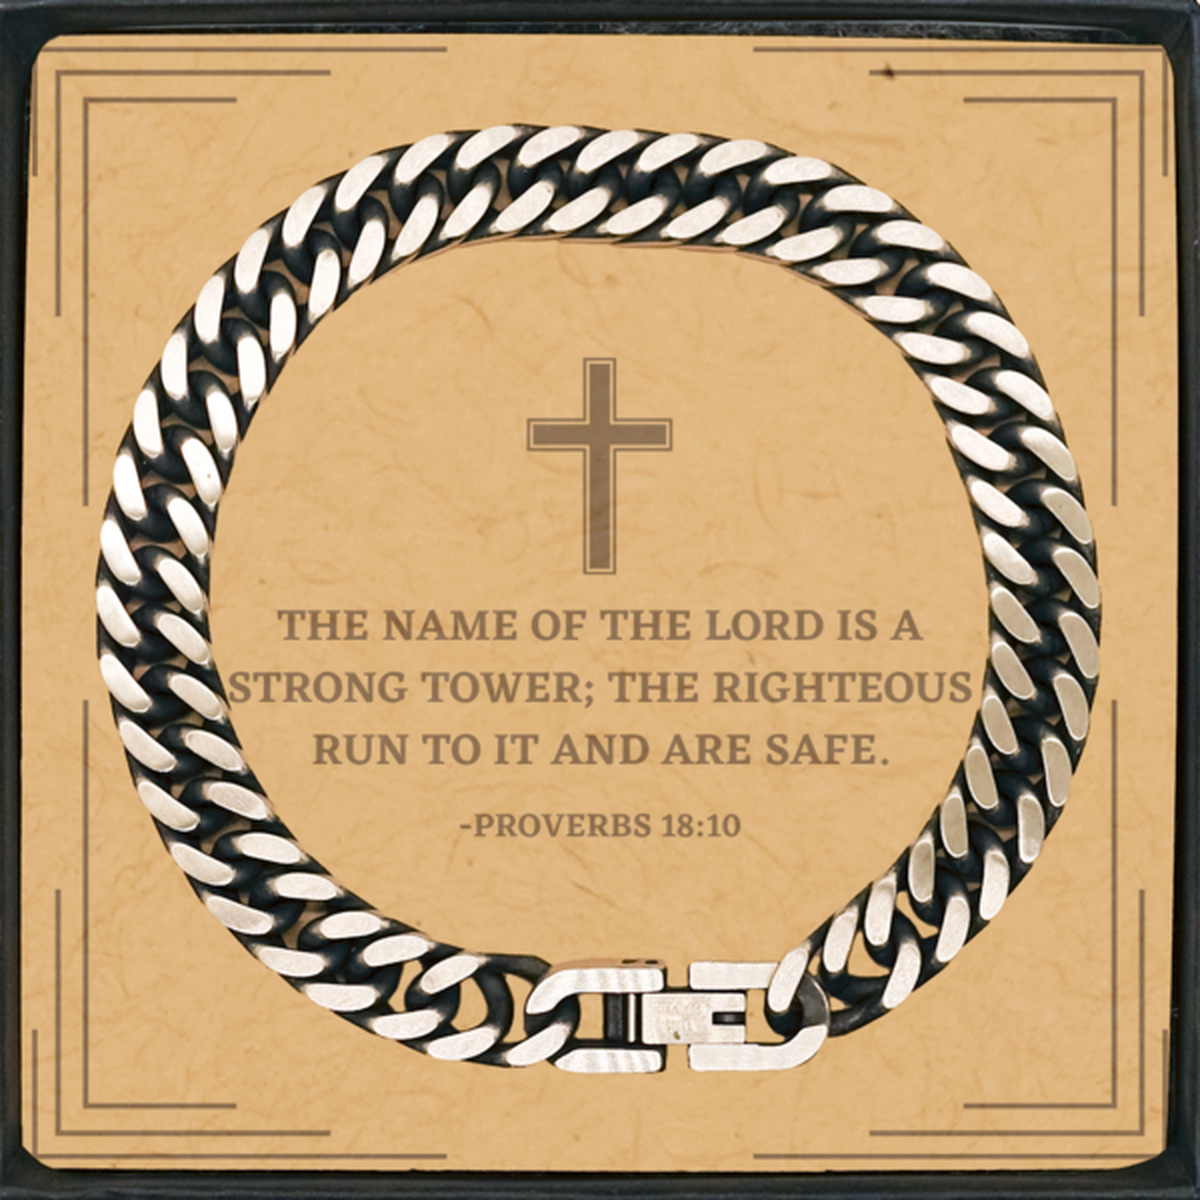 Baptism Gifts For Teenage Boys Girls, Christian Bible Verse Cuban Link Chain Bracelet, The name of the Lord is a strong, Confirmation Gifts, Bible Verse Card for Son, Godson, Grandson